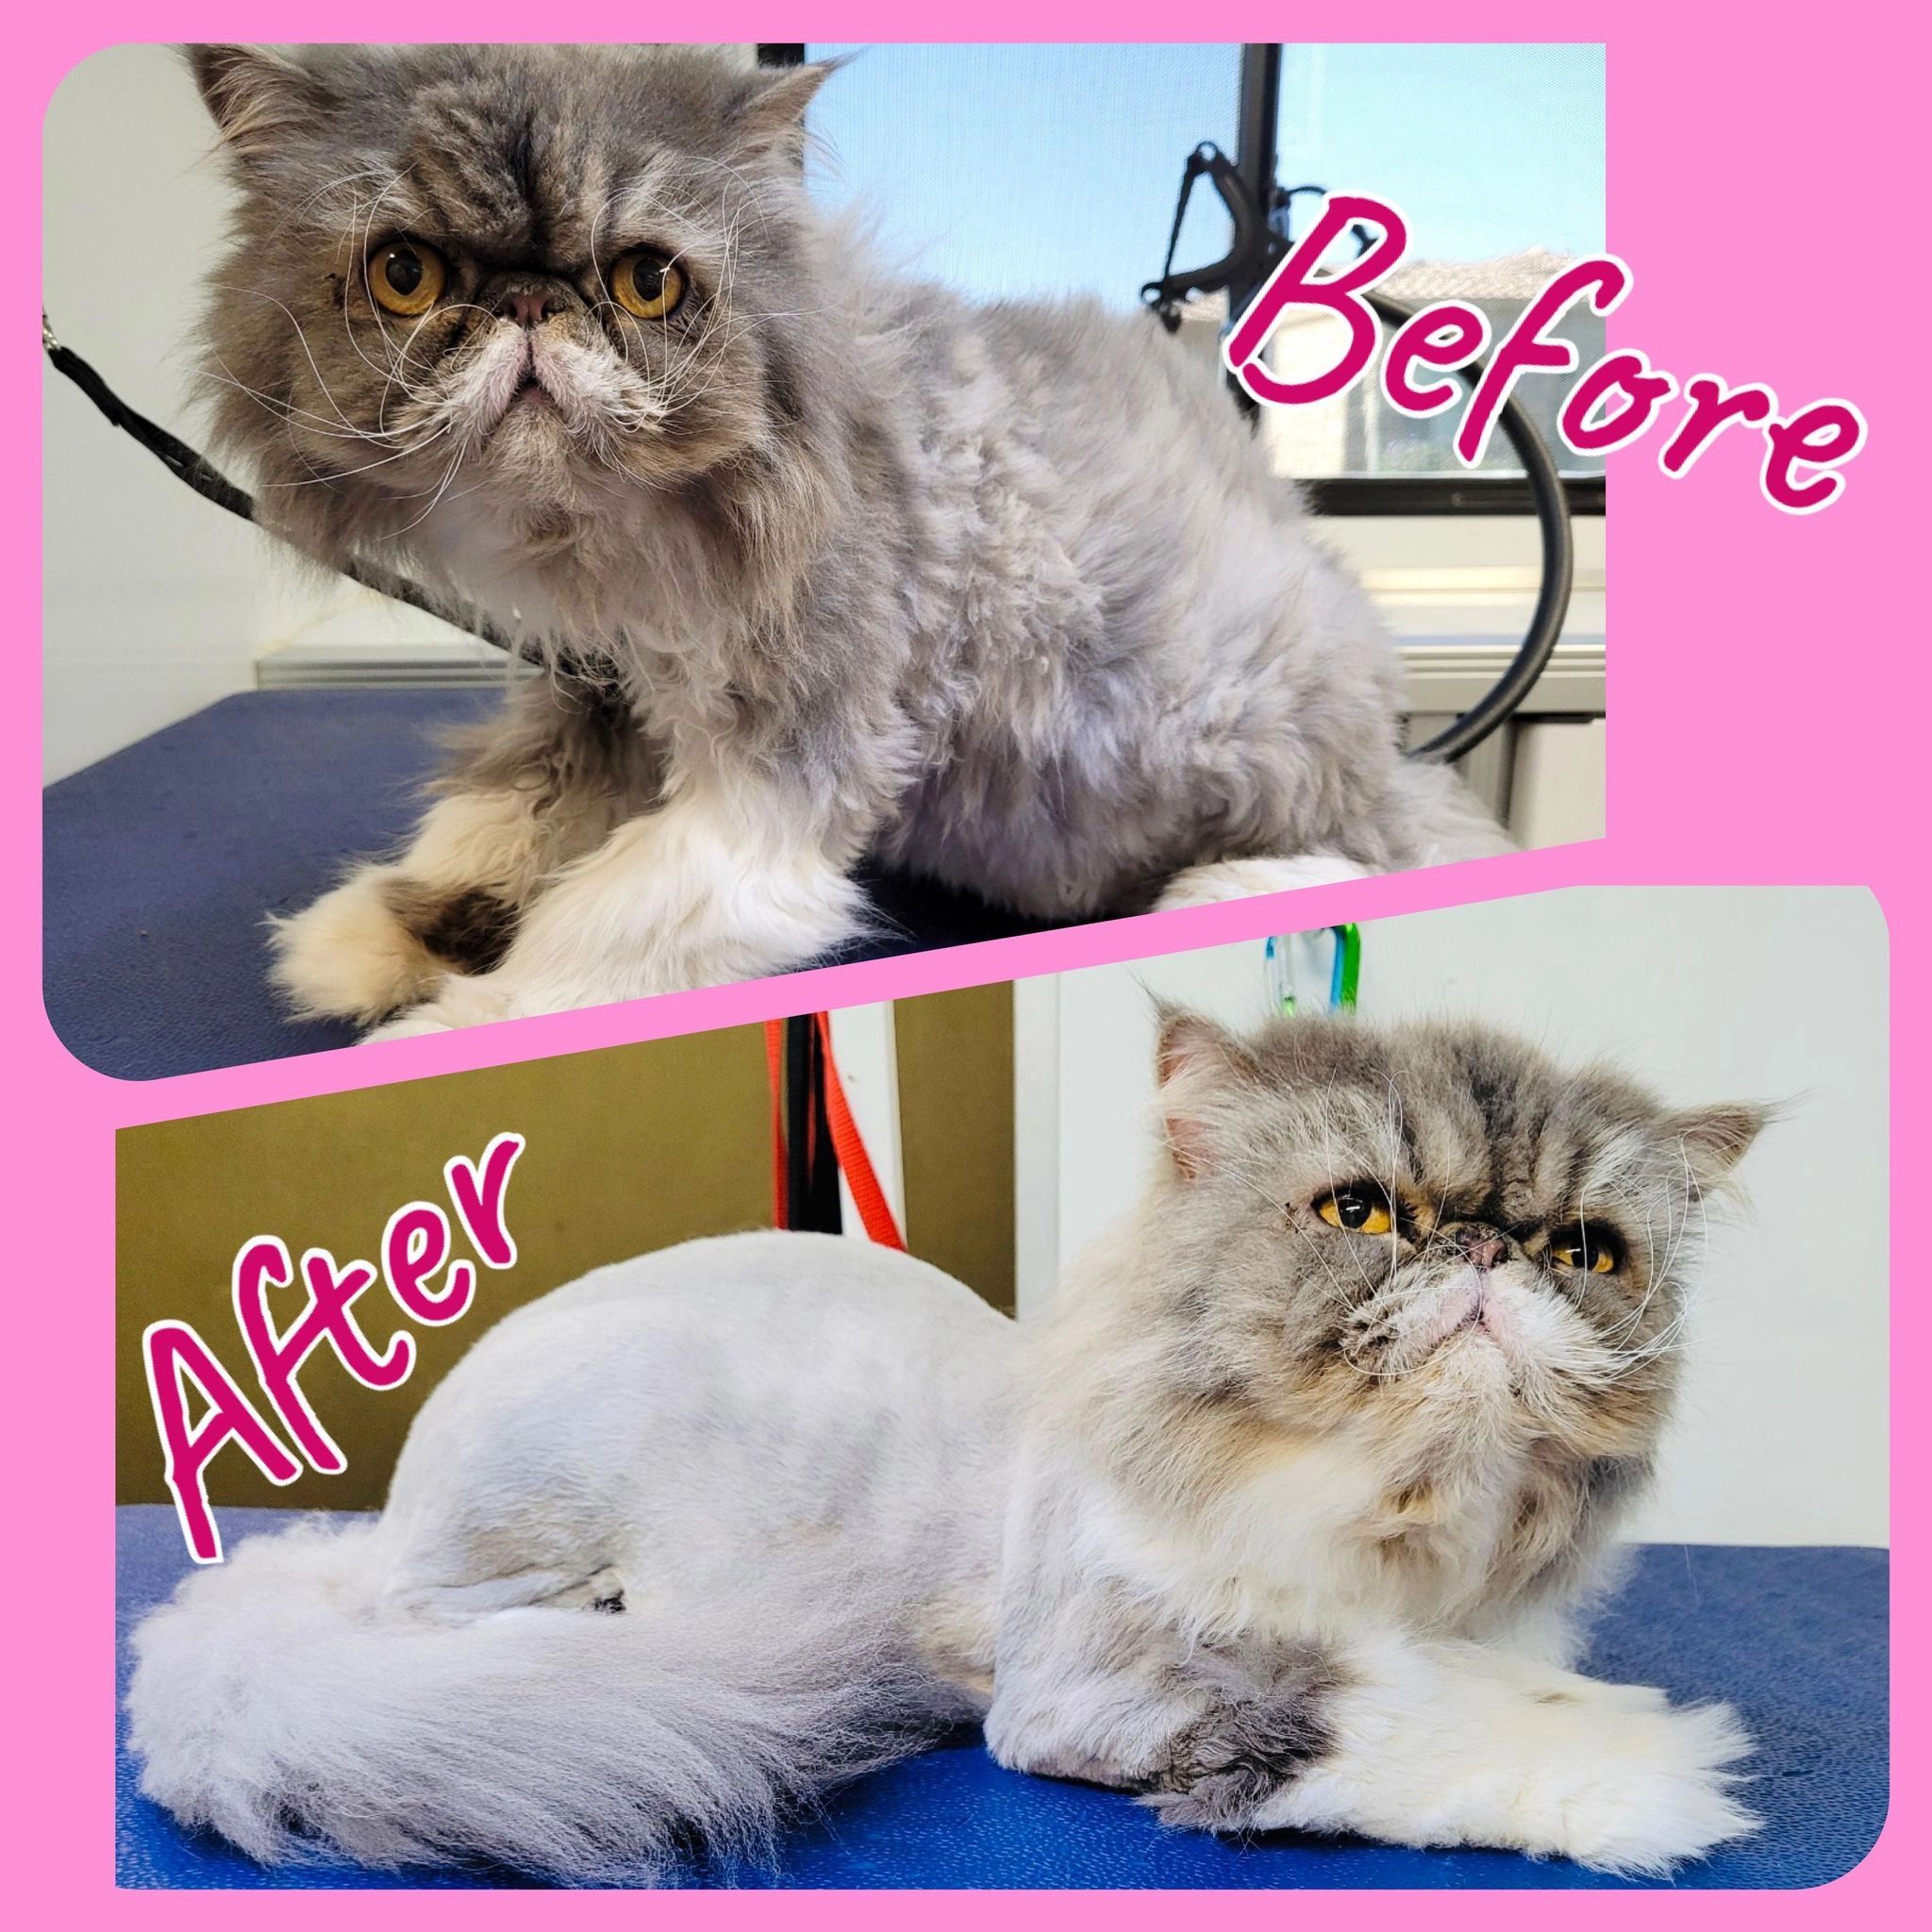 The Art of Grooming - Gilbert In-Home Cat Grooming, Mobile Cat Groomers, Cat  Grooming Services